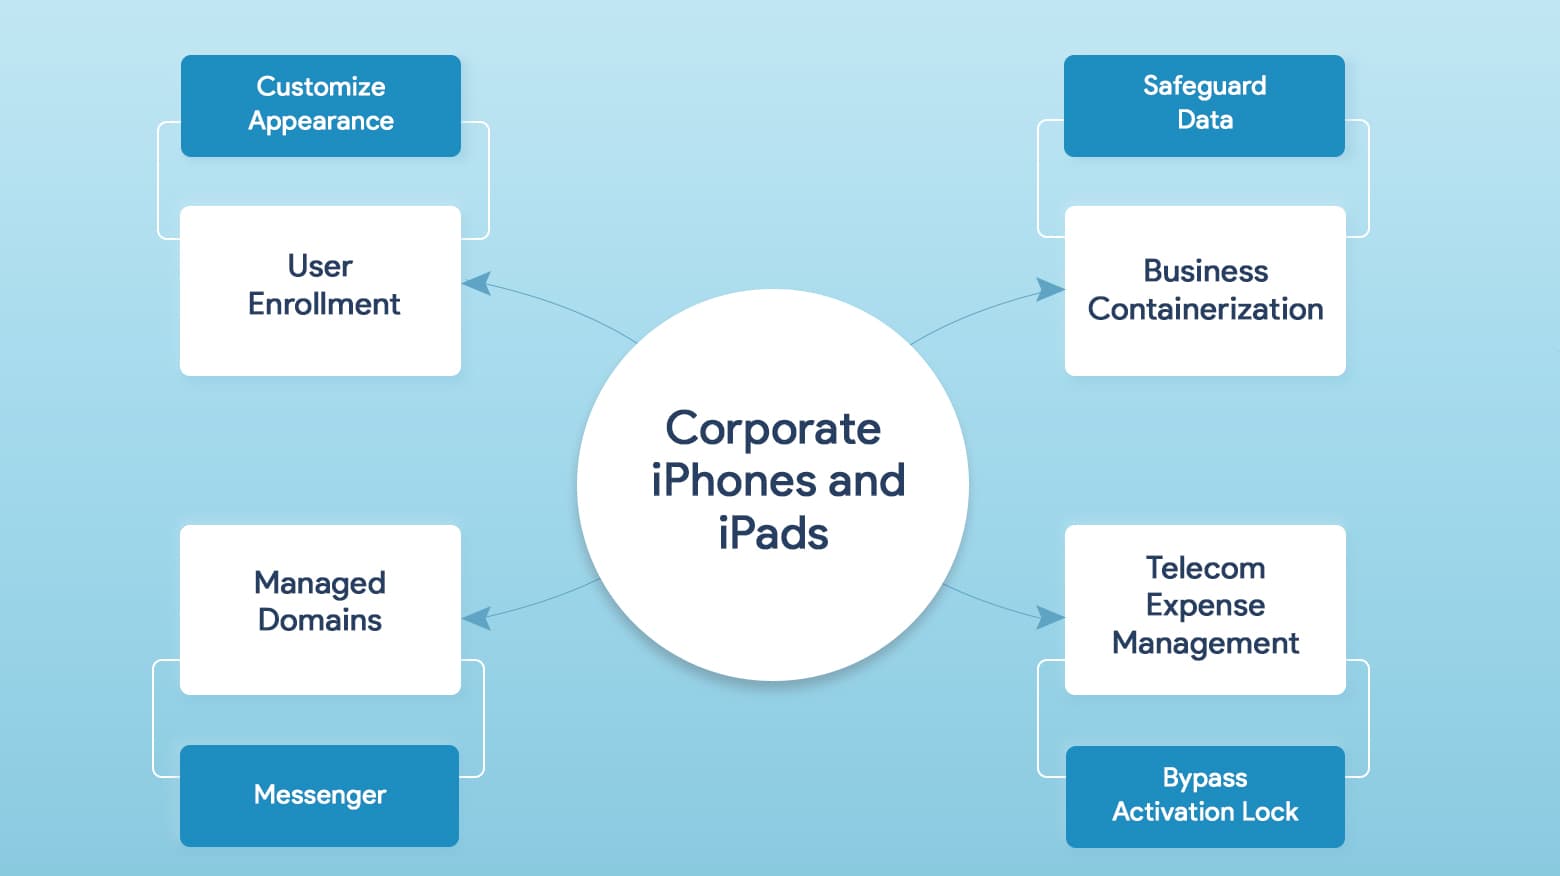 Take control of iPhones and iPads you've issued to employees with powerful MDM tools.